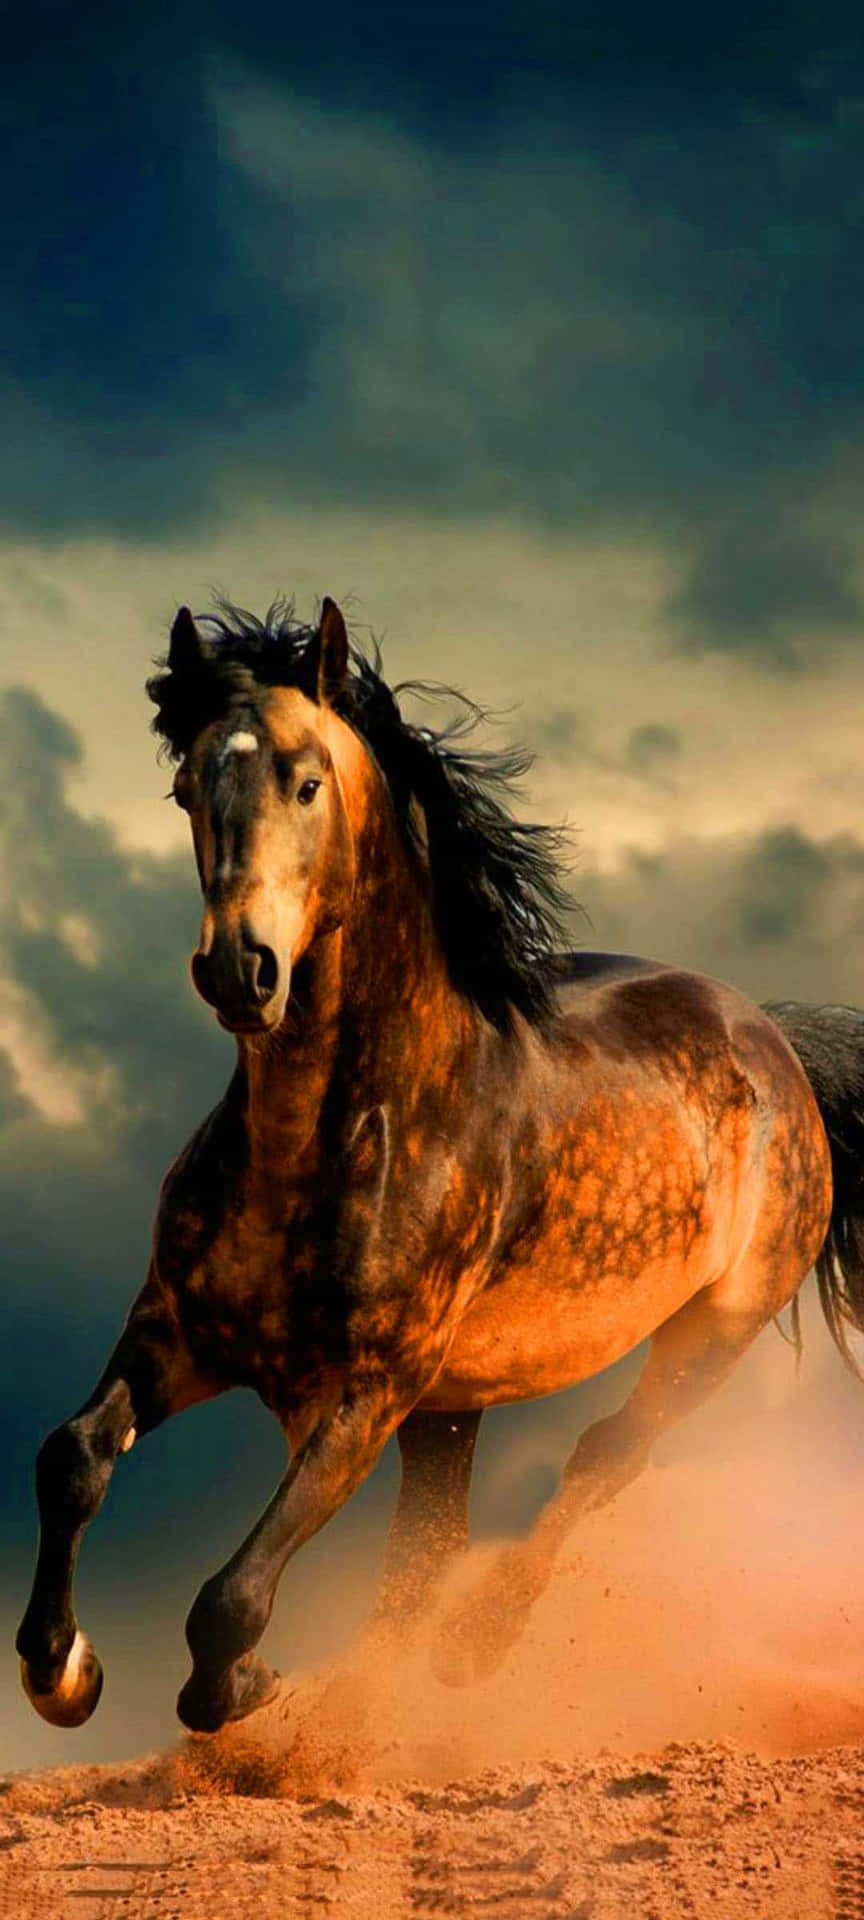 Horse Wallpapers 4K Apk Download for Android- Latest version 1.15- com.hd .horsewallpaper.nice.horsepictures.beautifulhorse.wallpaper